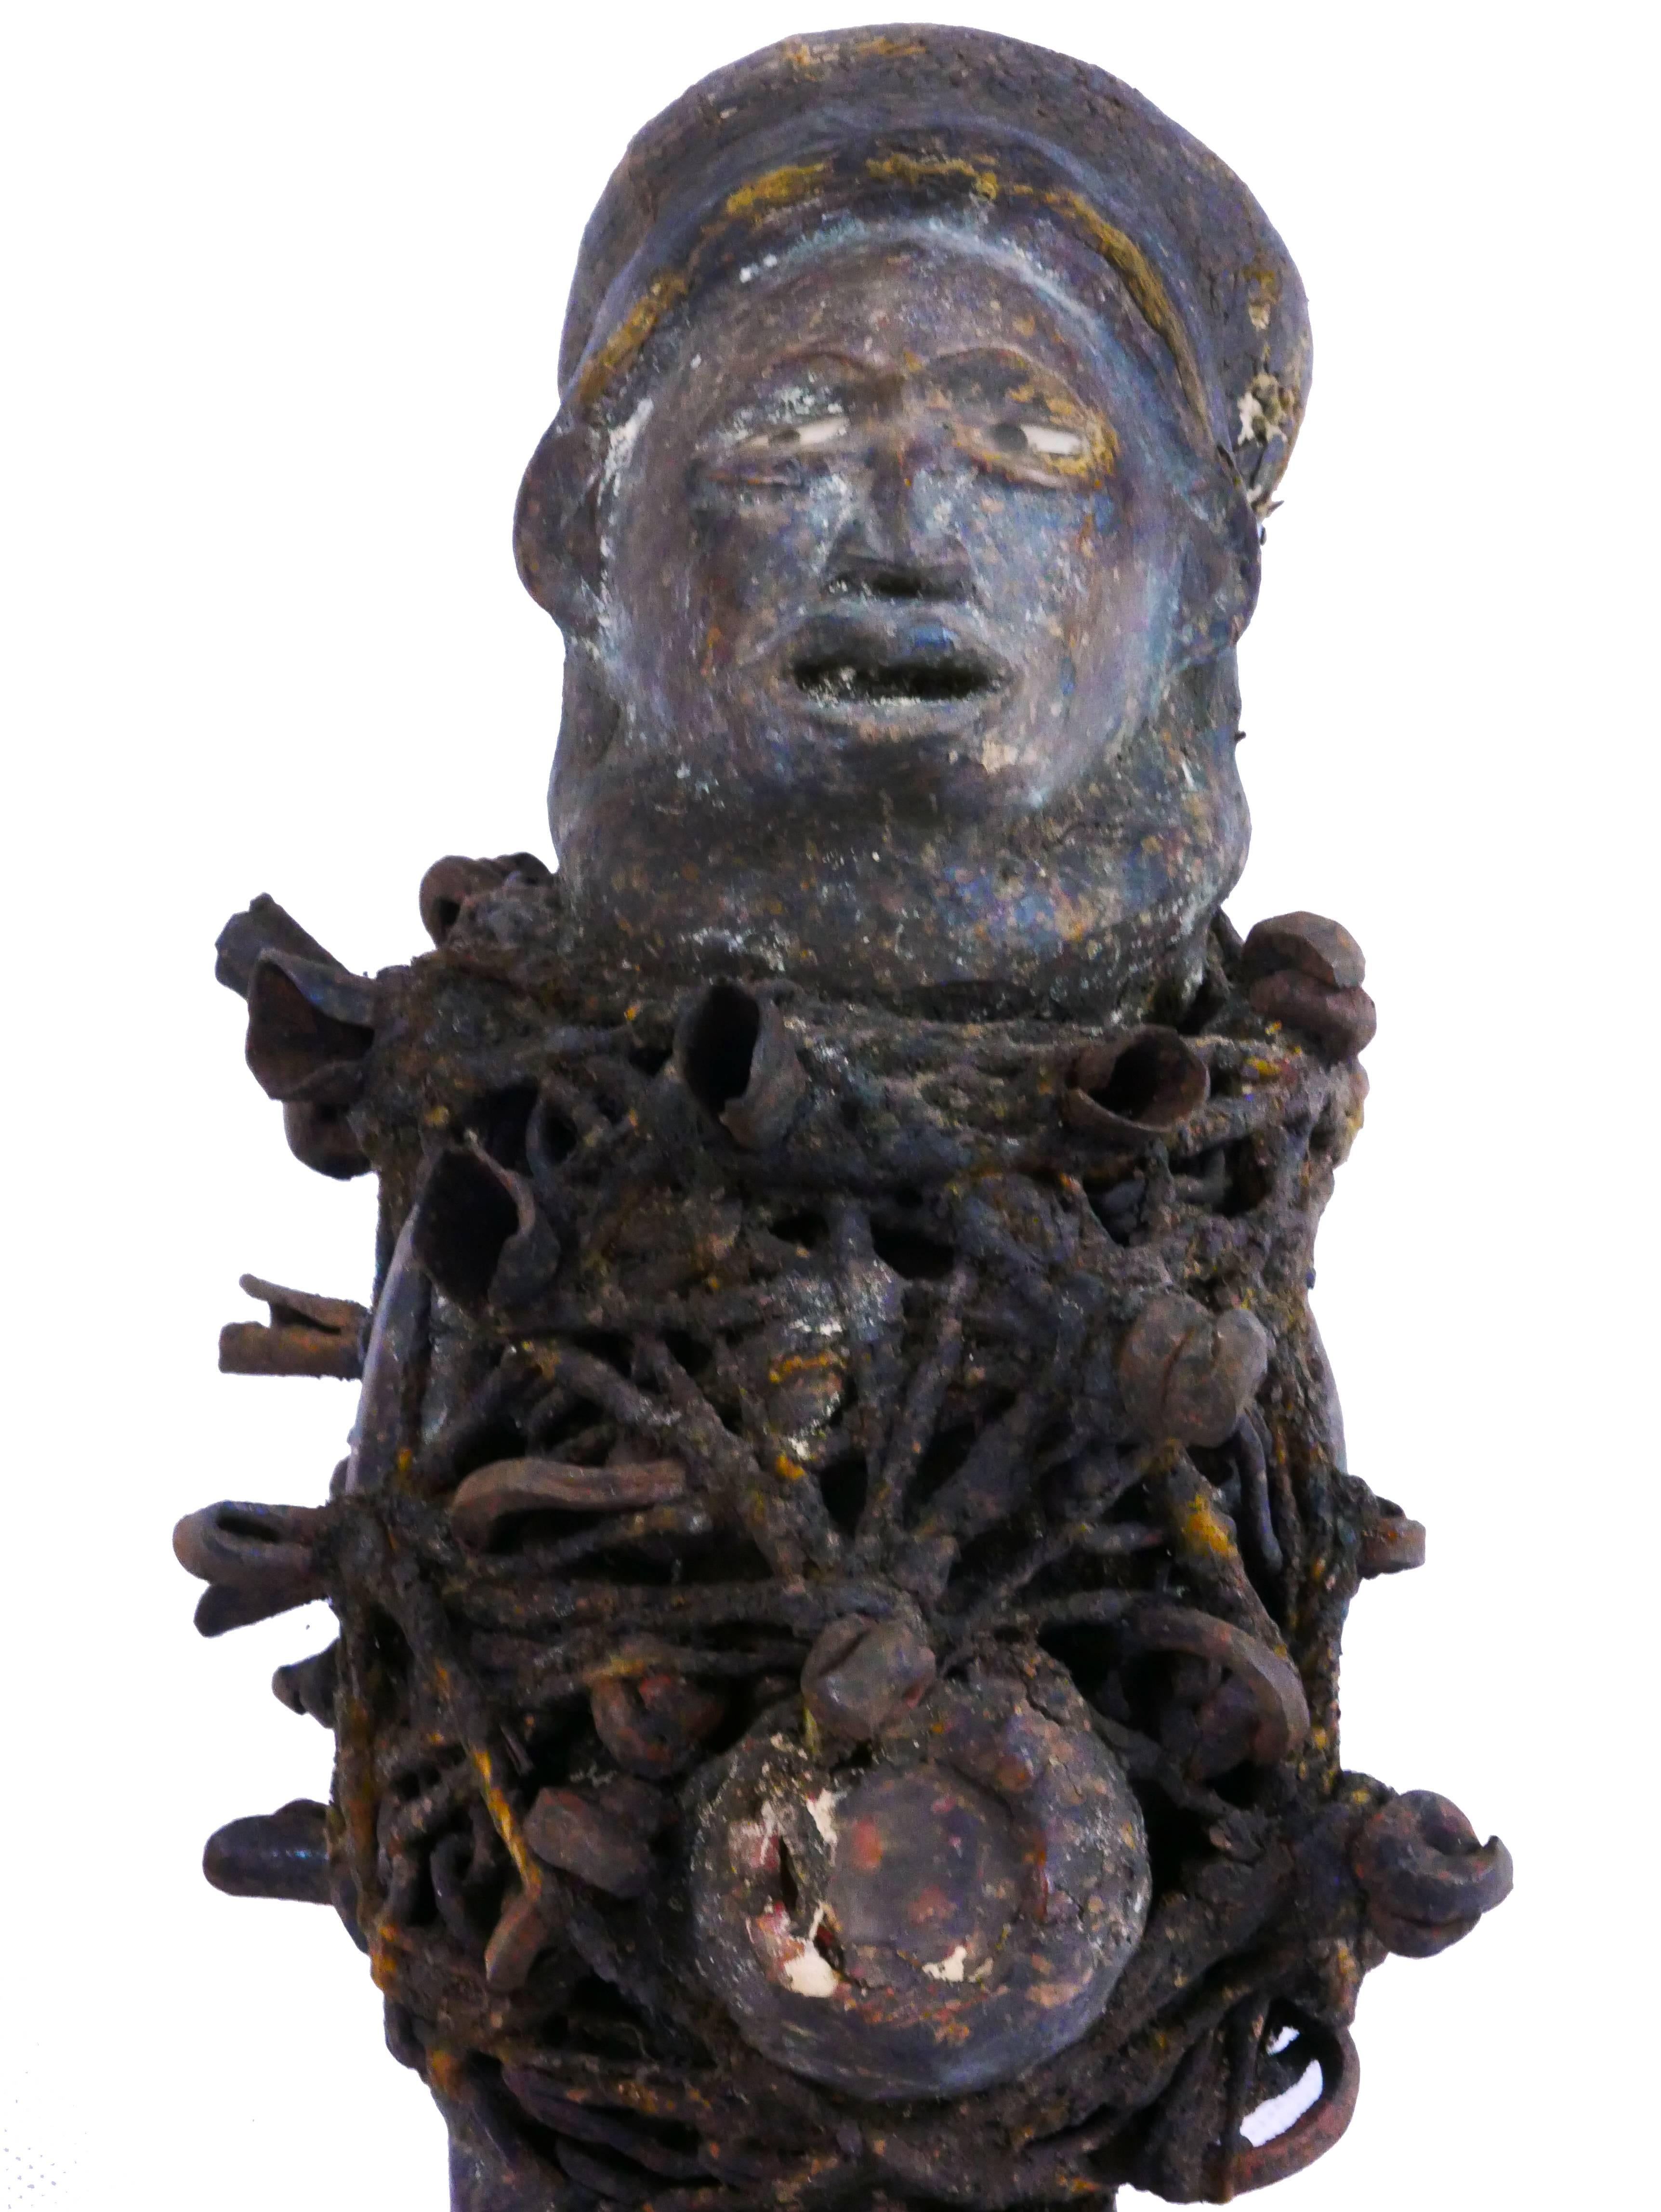 Nail Fetish 'Nkisi'
Bacongo people; Congo
Wood, pigment, fabric, metal 
Dimensions: H 10.5, W 4 inches
Approximate age: 100 years (+/- 7) old confirmed by the Museum of Arts and Science, Milan 

This African tribal artifact is a gem for